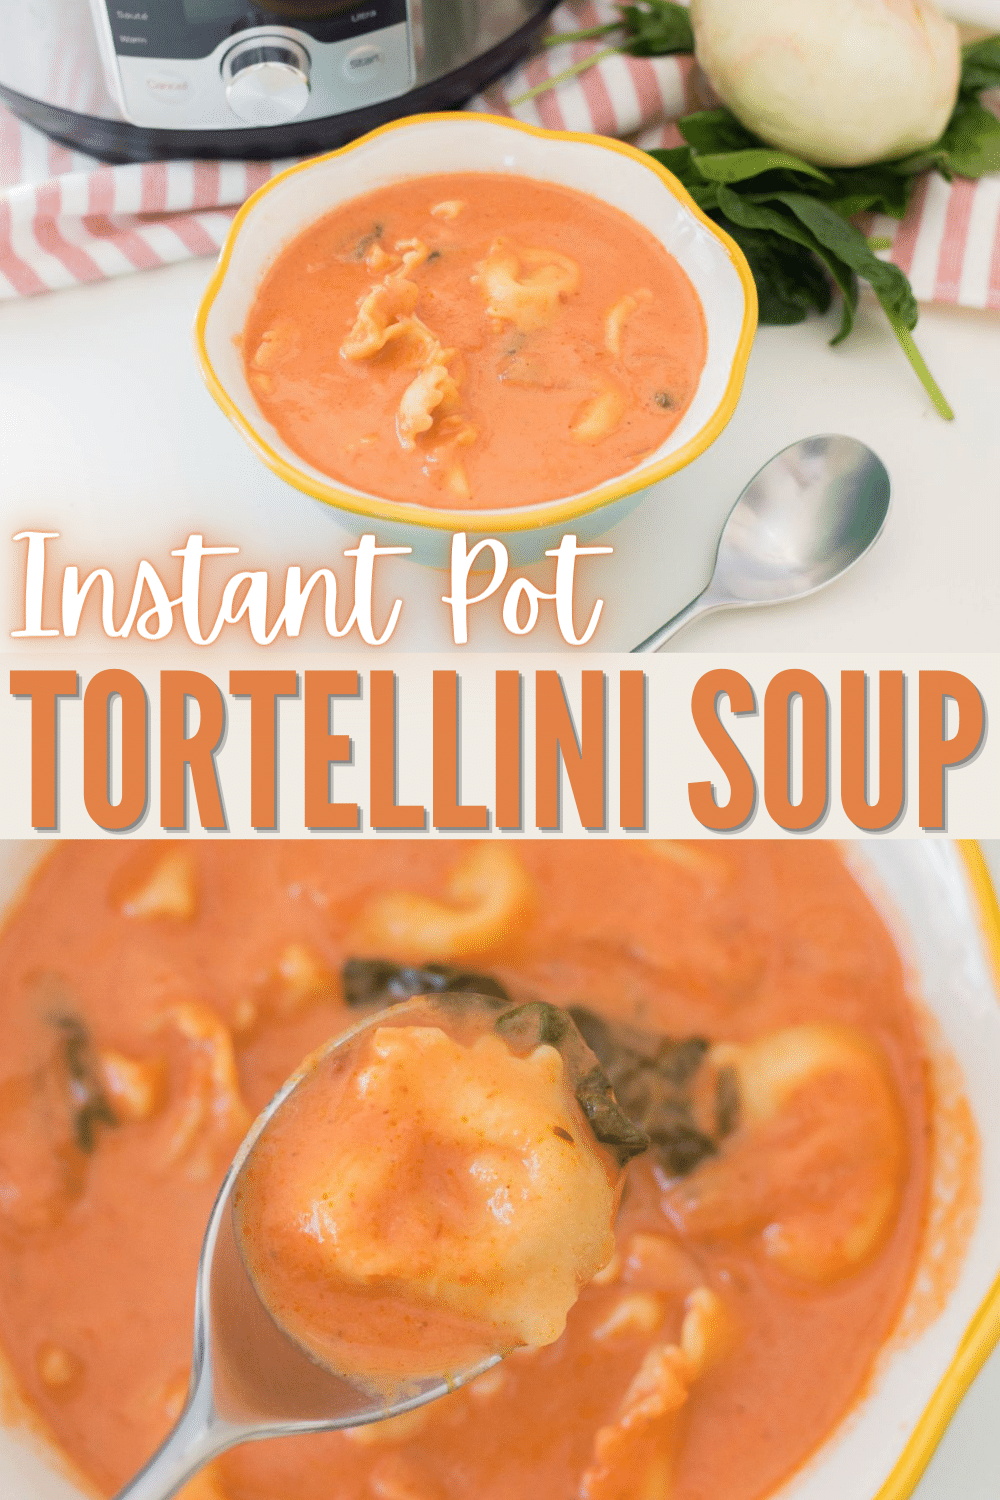 Instant Pot Tortellini Soup is one of the most delicious Instant Pot recipes. In just a few minutes you’ll have a hearty, healthy meal. #instantpot #pressurecooker #tortellinisoup #tortellini #soup via @wondermomwannab